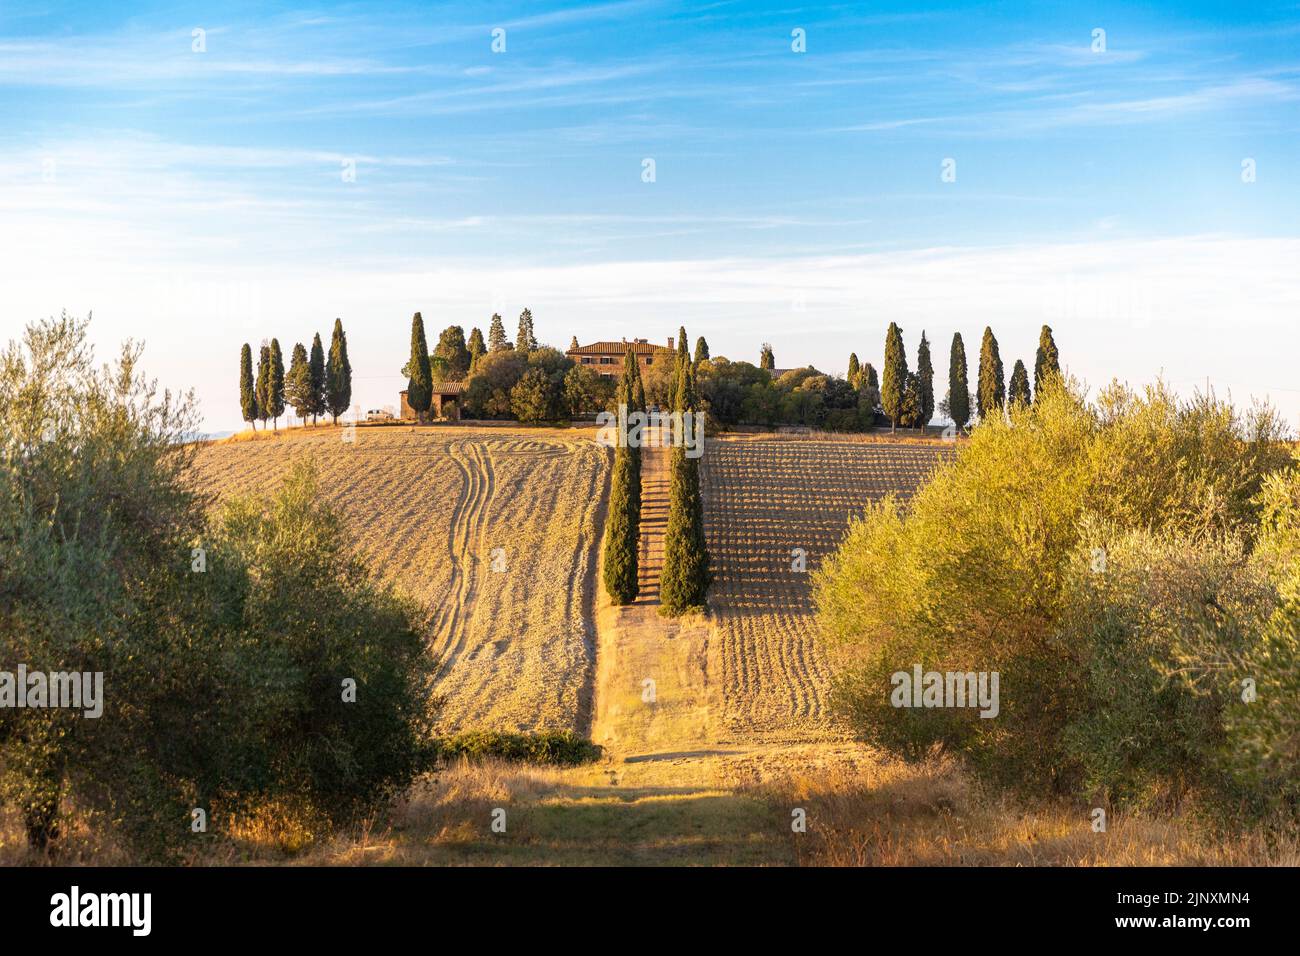 Tuscan landscape with cypress trees, famous from the movie Gladiator Stock Photo